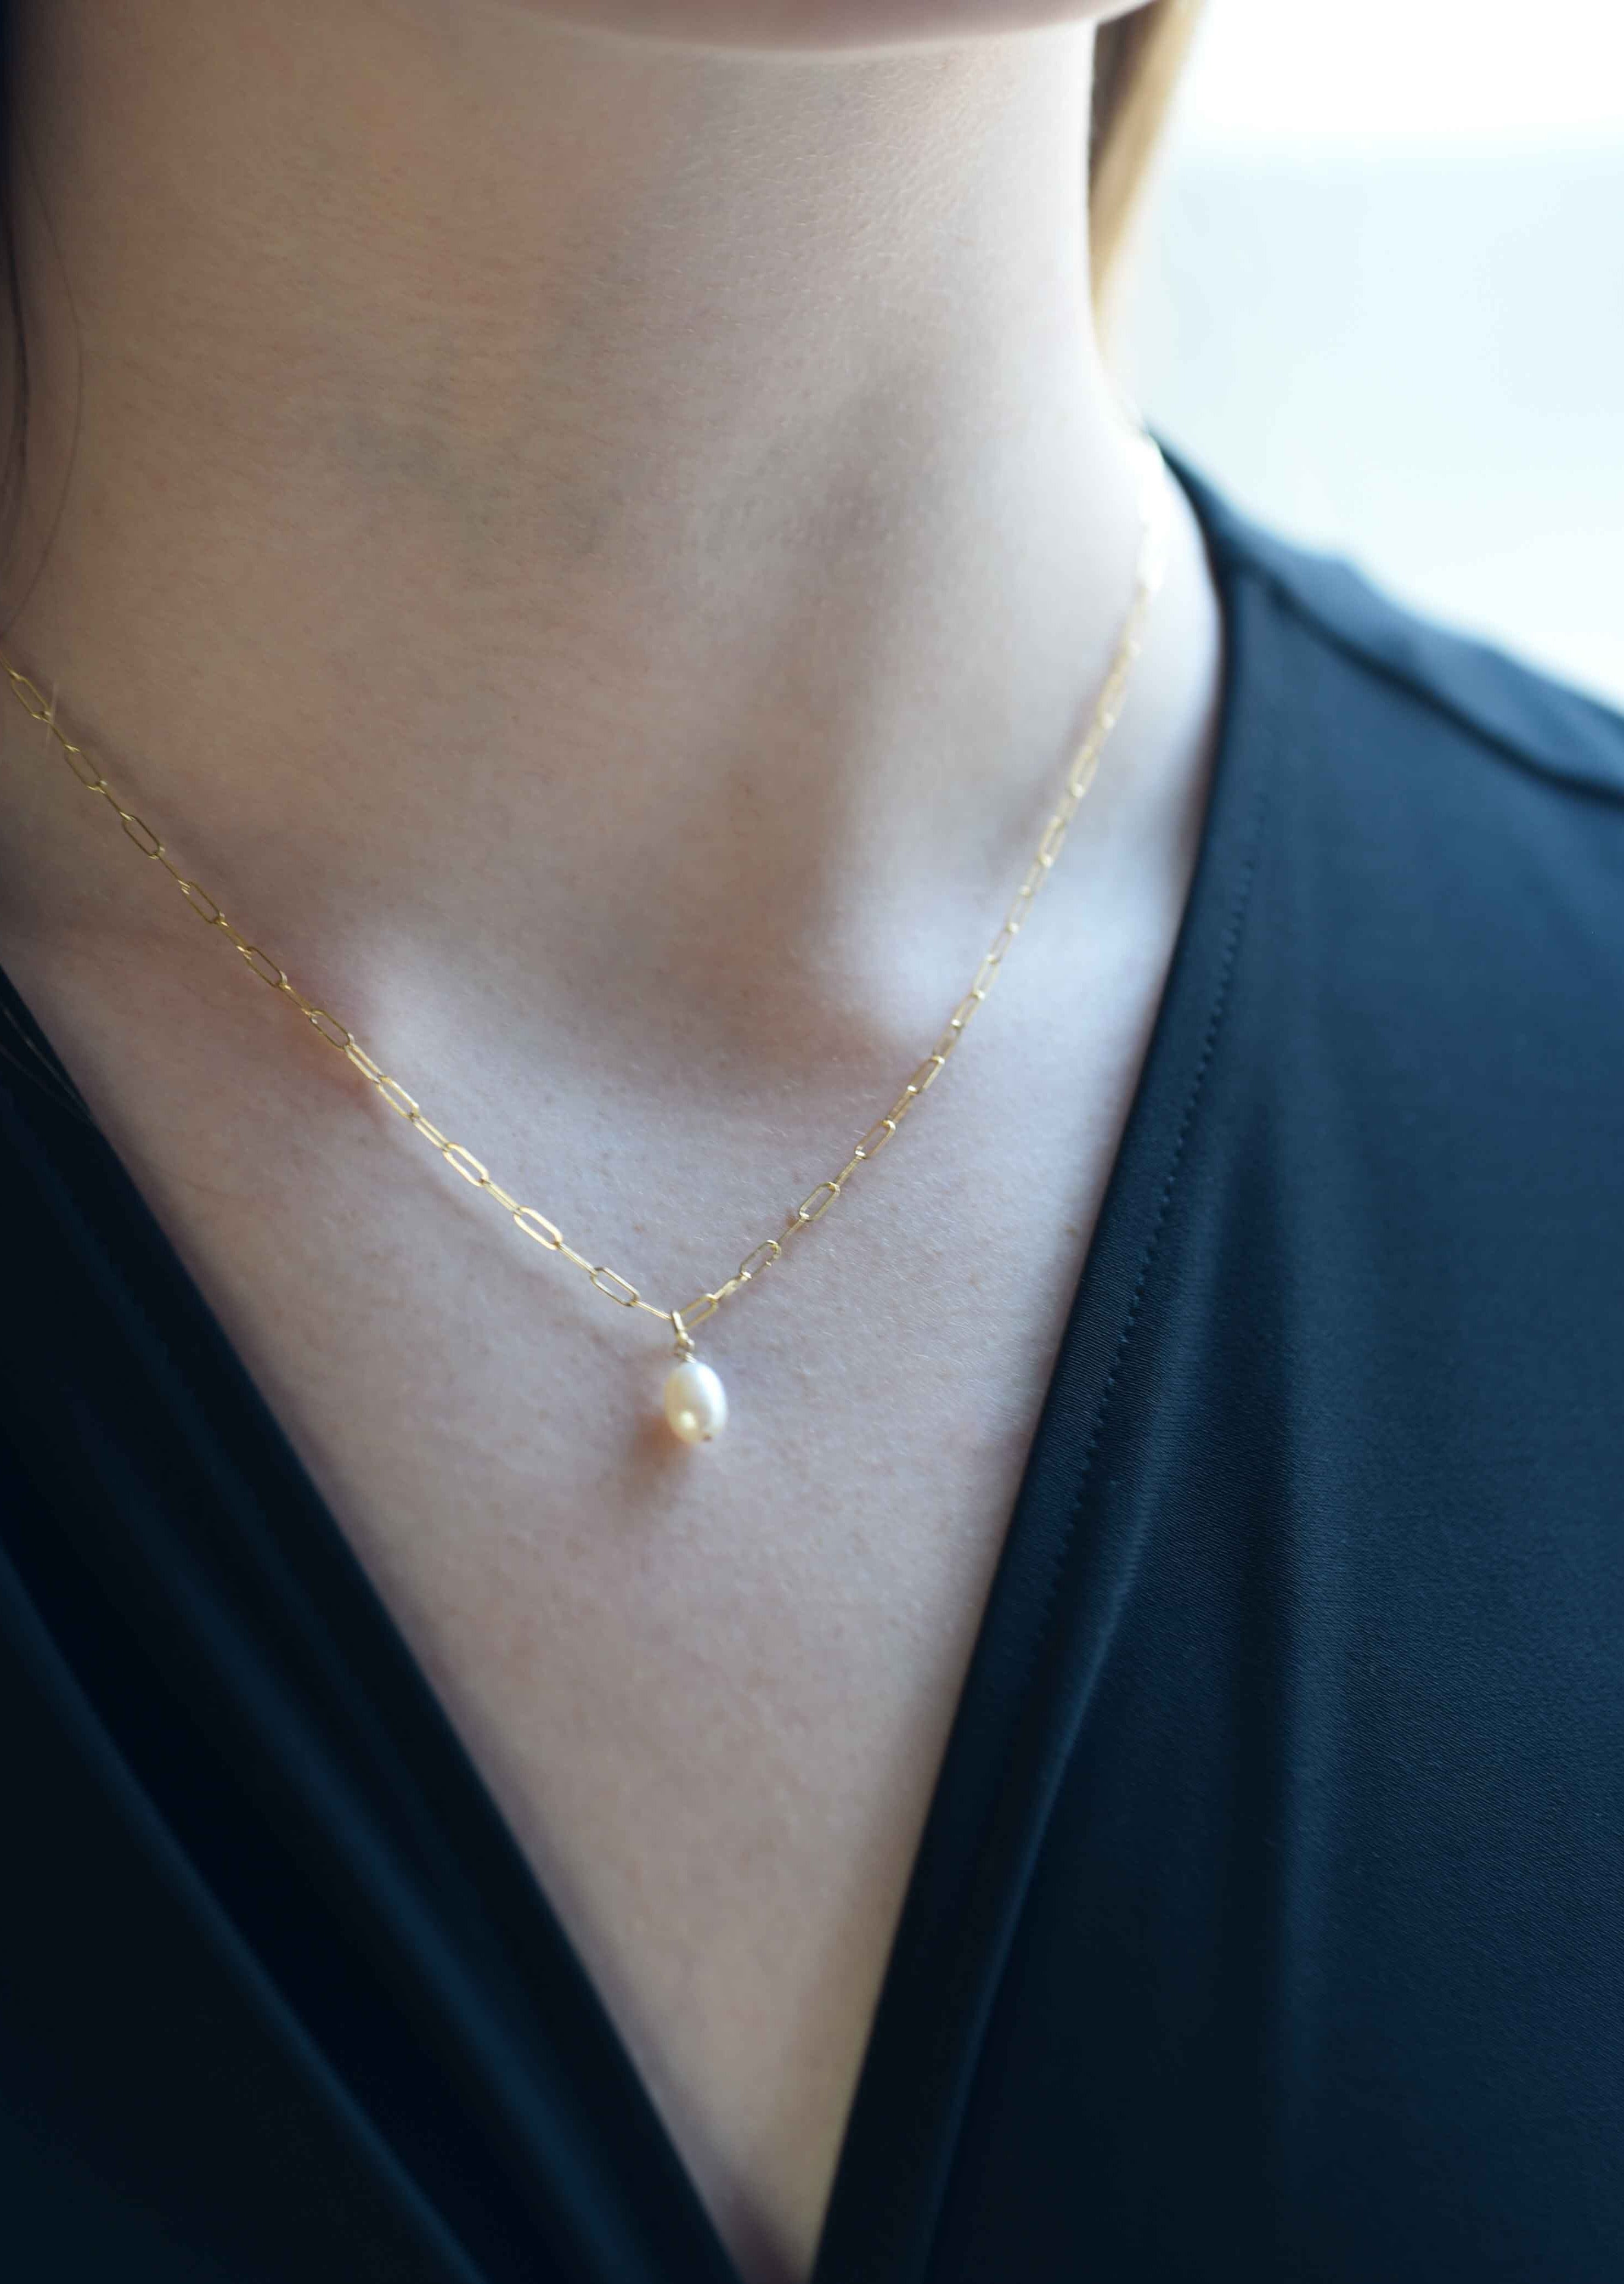 Single Pearl Drop Necklace 14k Gold with pendant